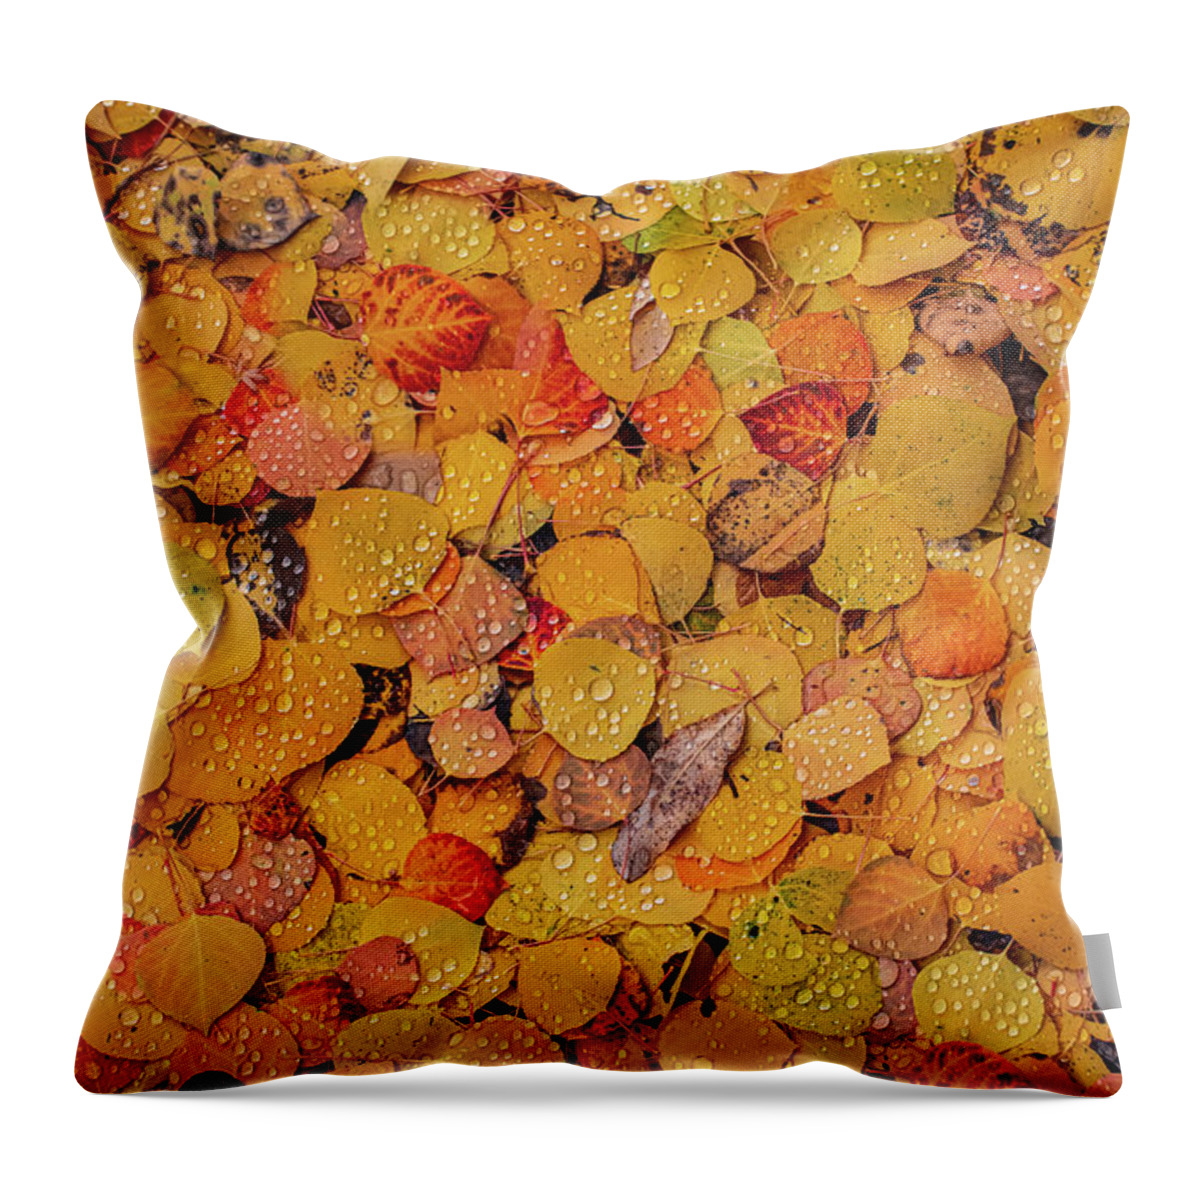 Aspen Leaves Throw Pillow featuring the photograph Aspen Water Colors by Jeff Phillippi